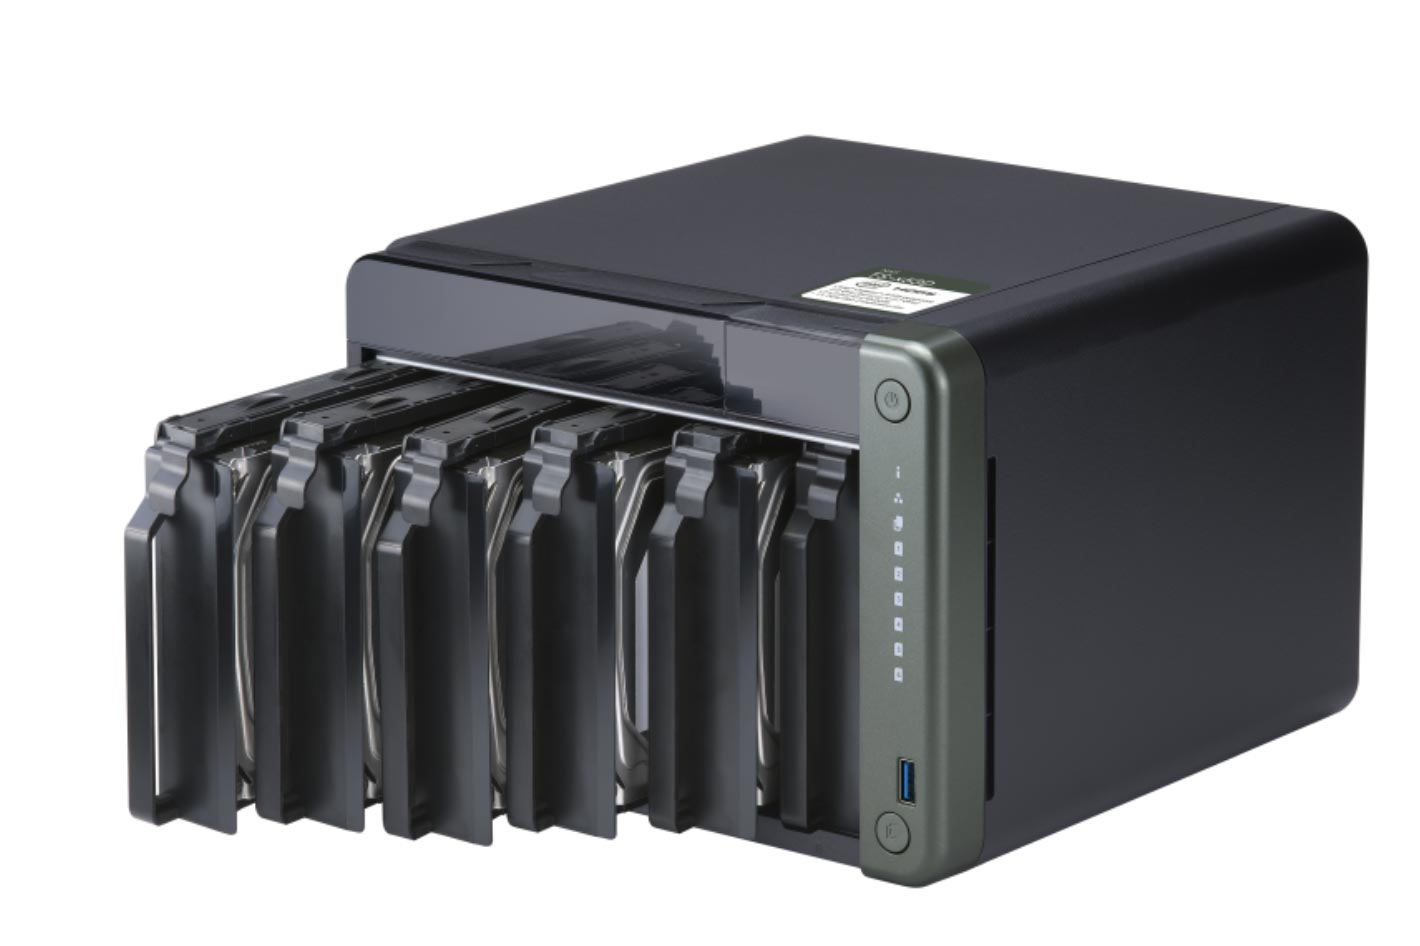 QNAP TS-x53D 2.5GbE NAS: 2.5 Gigabit over existing CAT5e by Jose ...